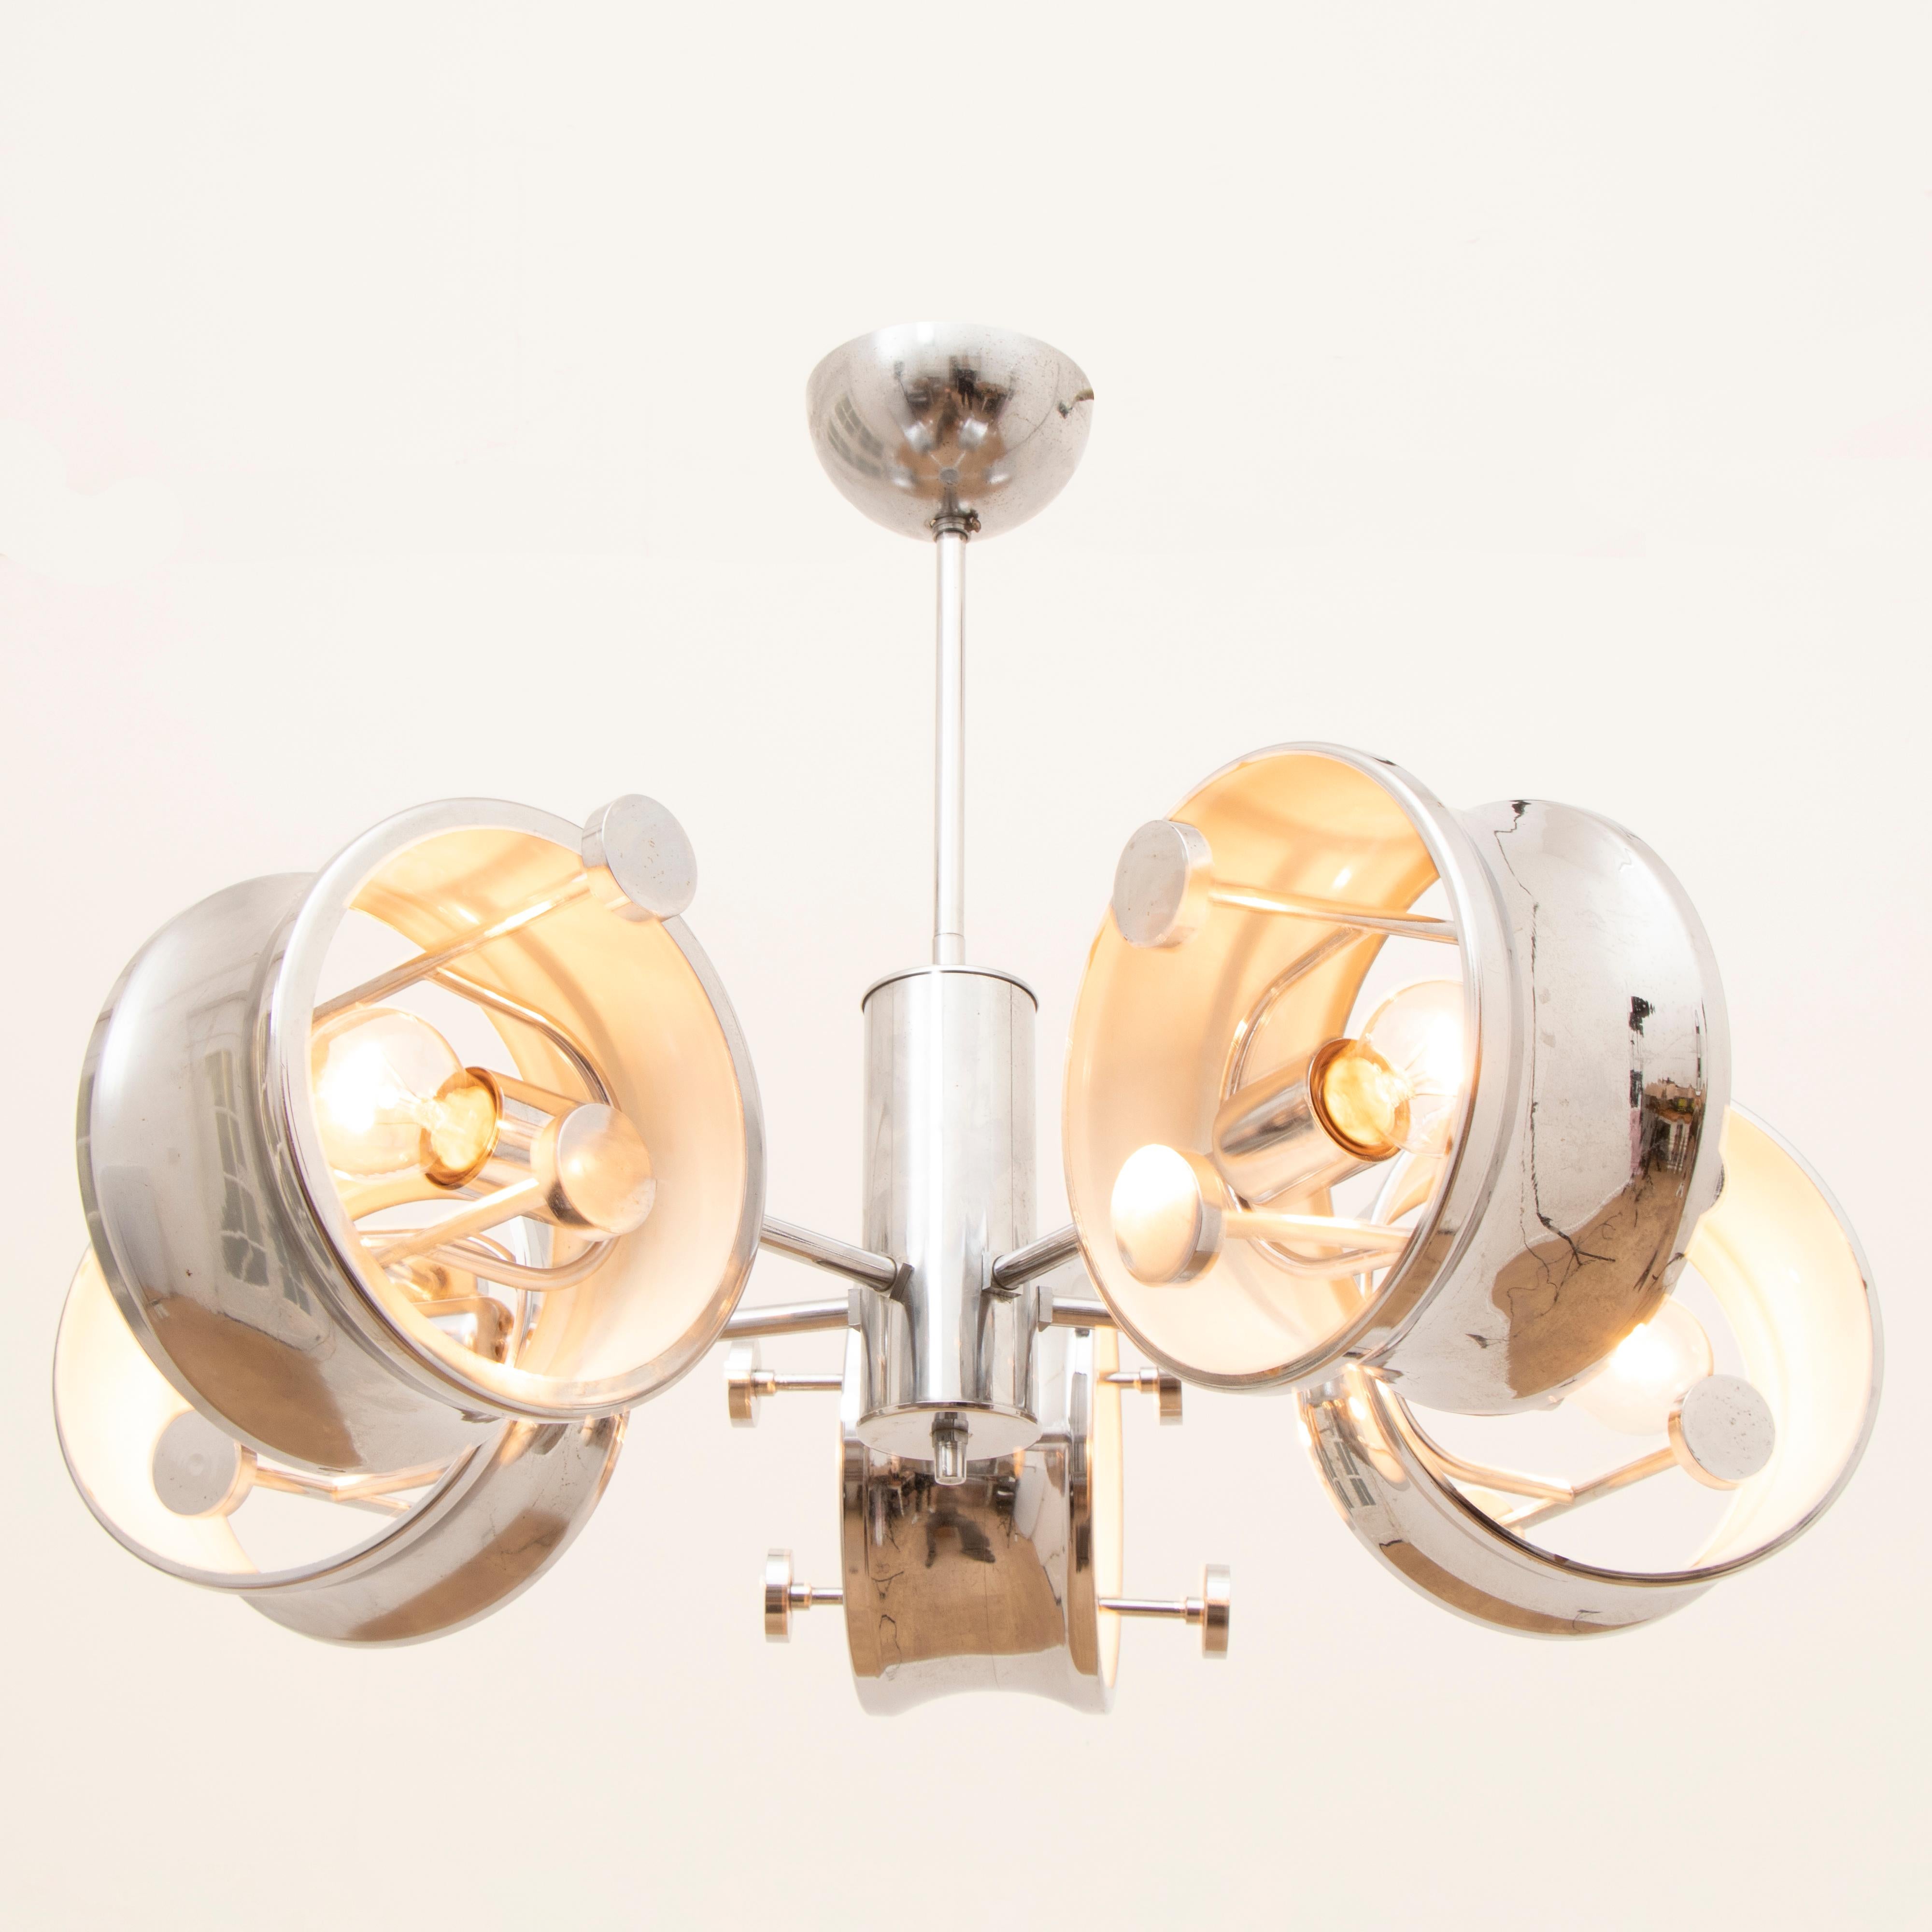 An unusual and abstract 1960s five-arm chrome hanging light with circular covers surrounding each bulb in the style of Sciolari. The circular bevelled covers are sprayed white inside with four vertical rods (two at each side) each with a chrome disc